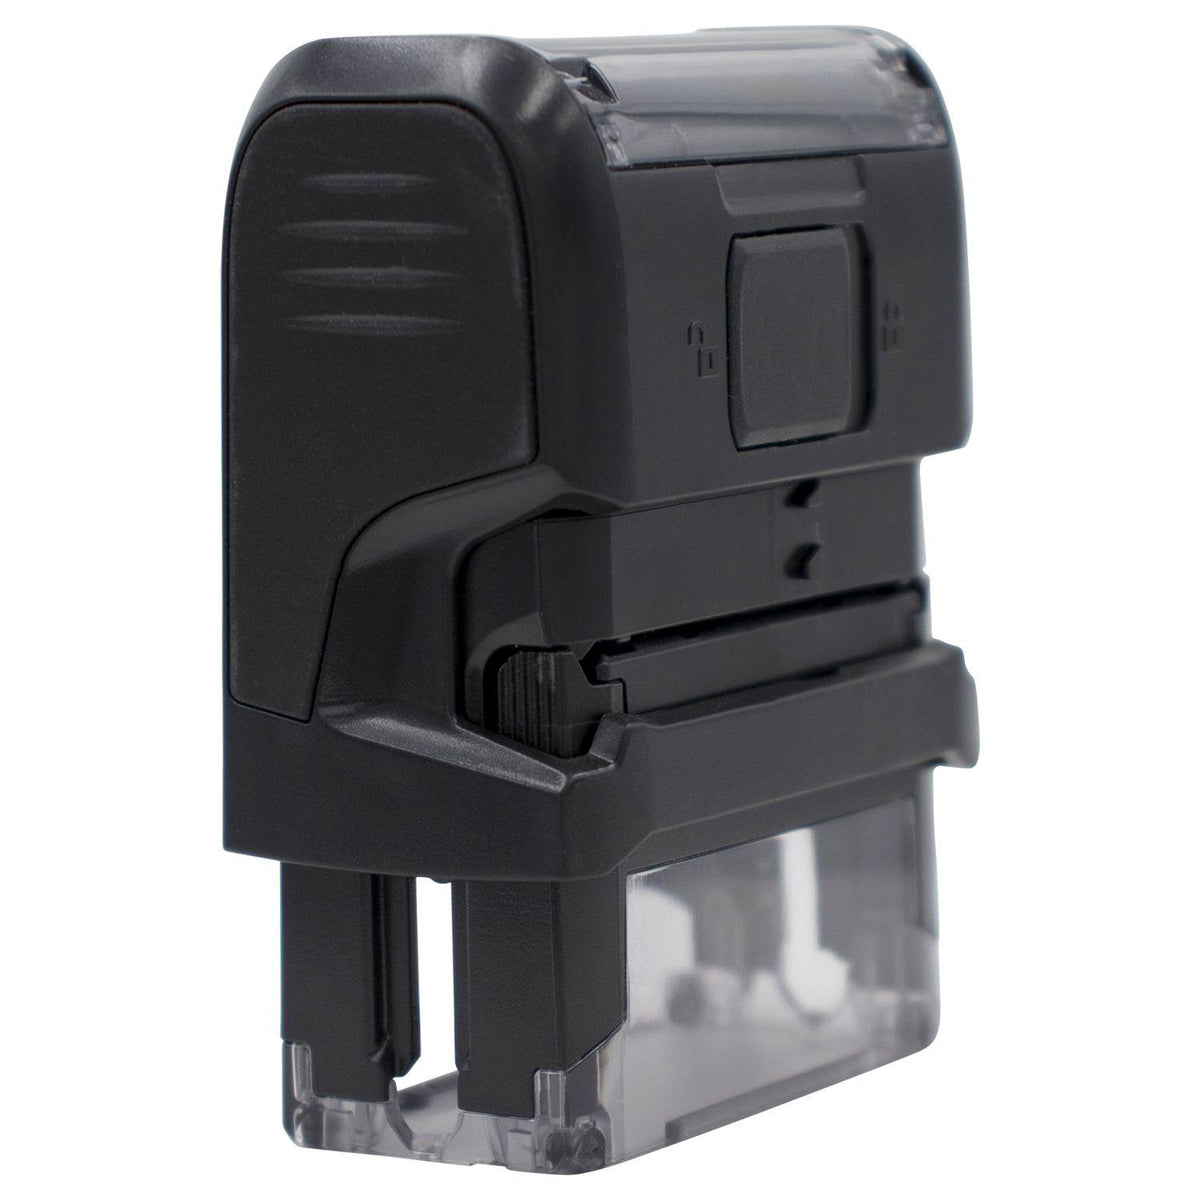 Self-Inking Bold Banco Stamp - Engineer Seal Stamps - Brand_Trodat, Impression Size_Small, Stamp Type_Self-Inking Stamp, Type of Use_Accounting, Type of Use_Finance